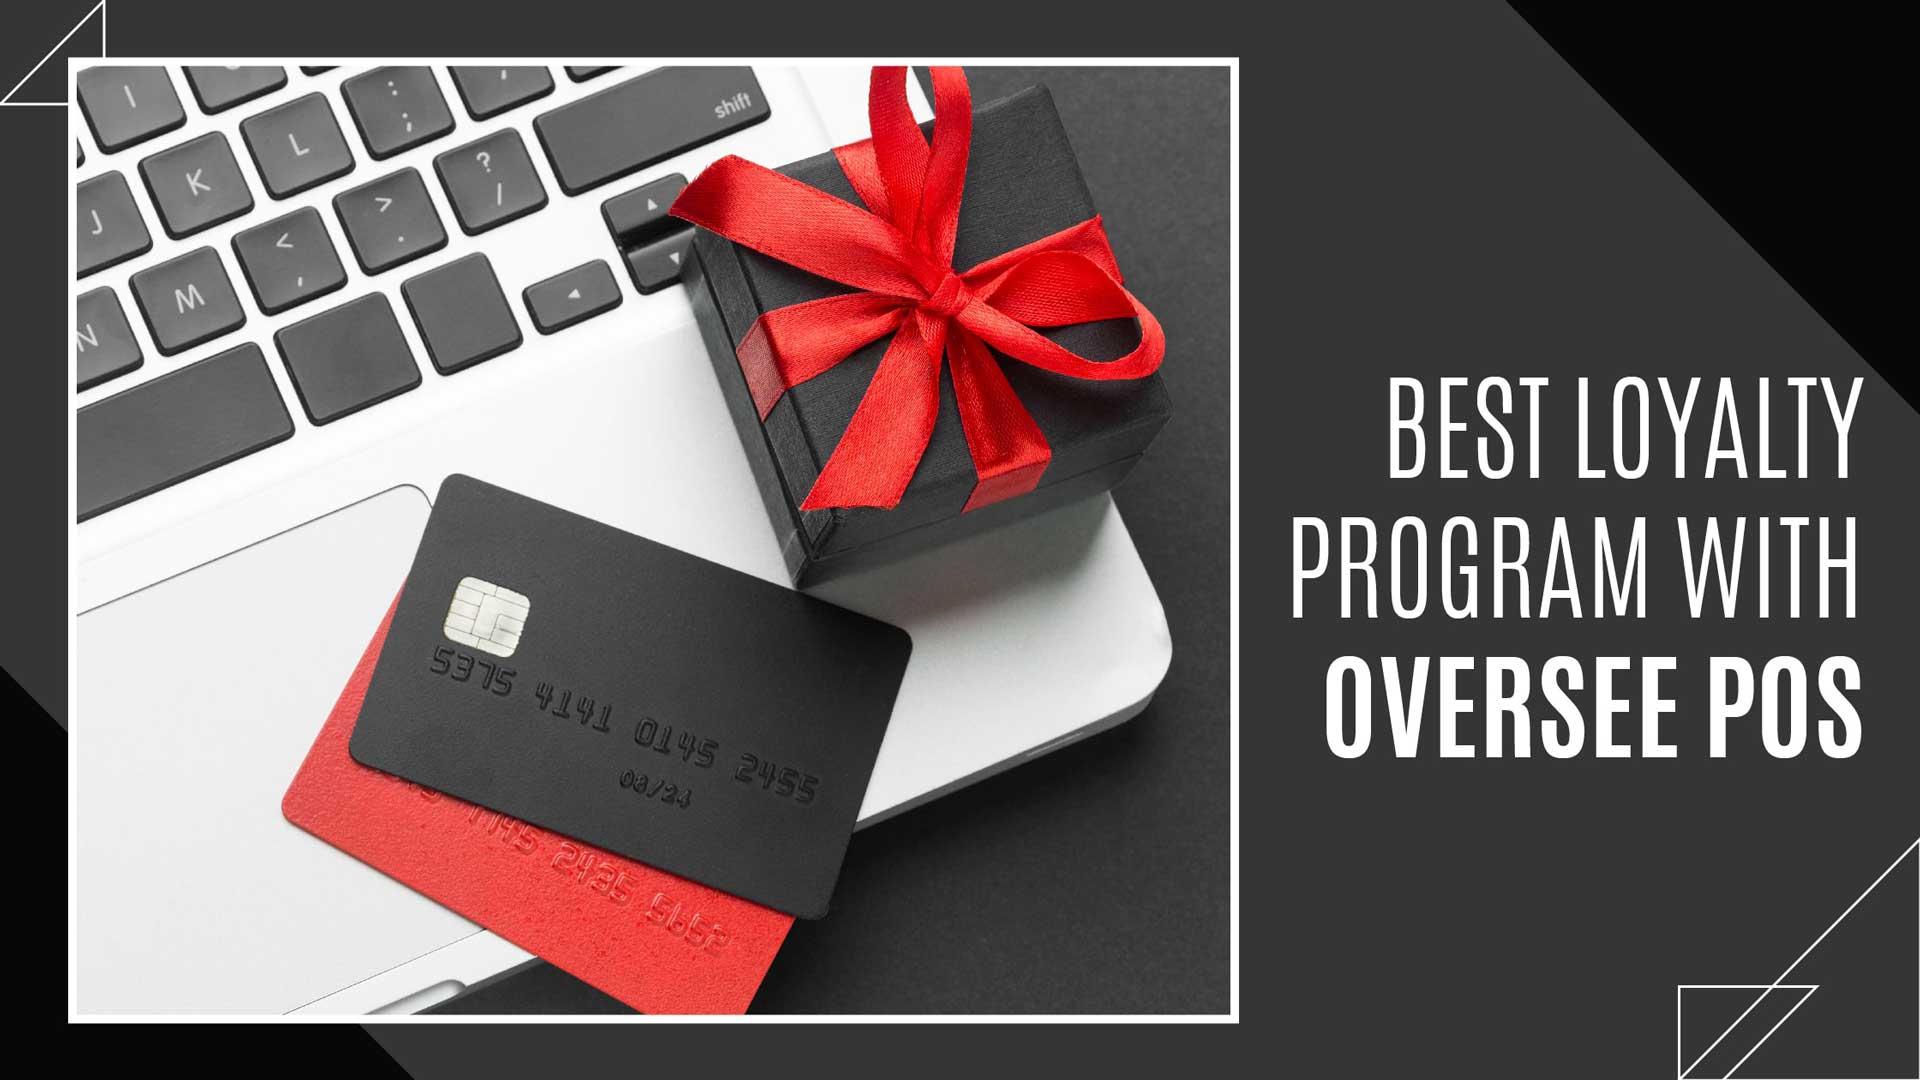 The Best Loyalty Program with Oversee POS